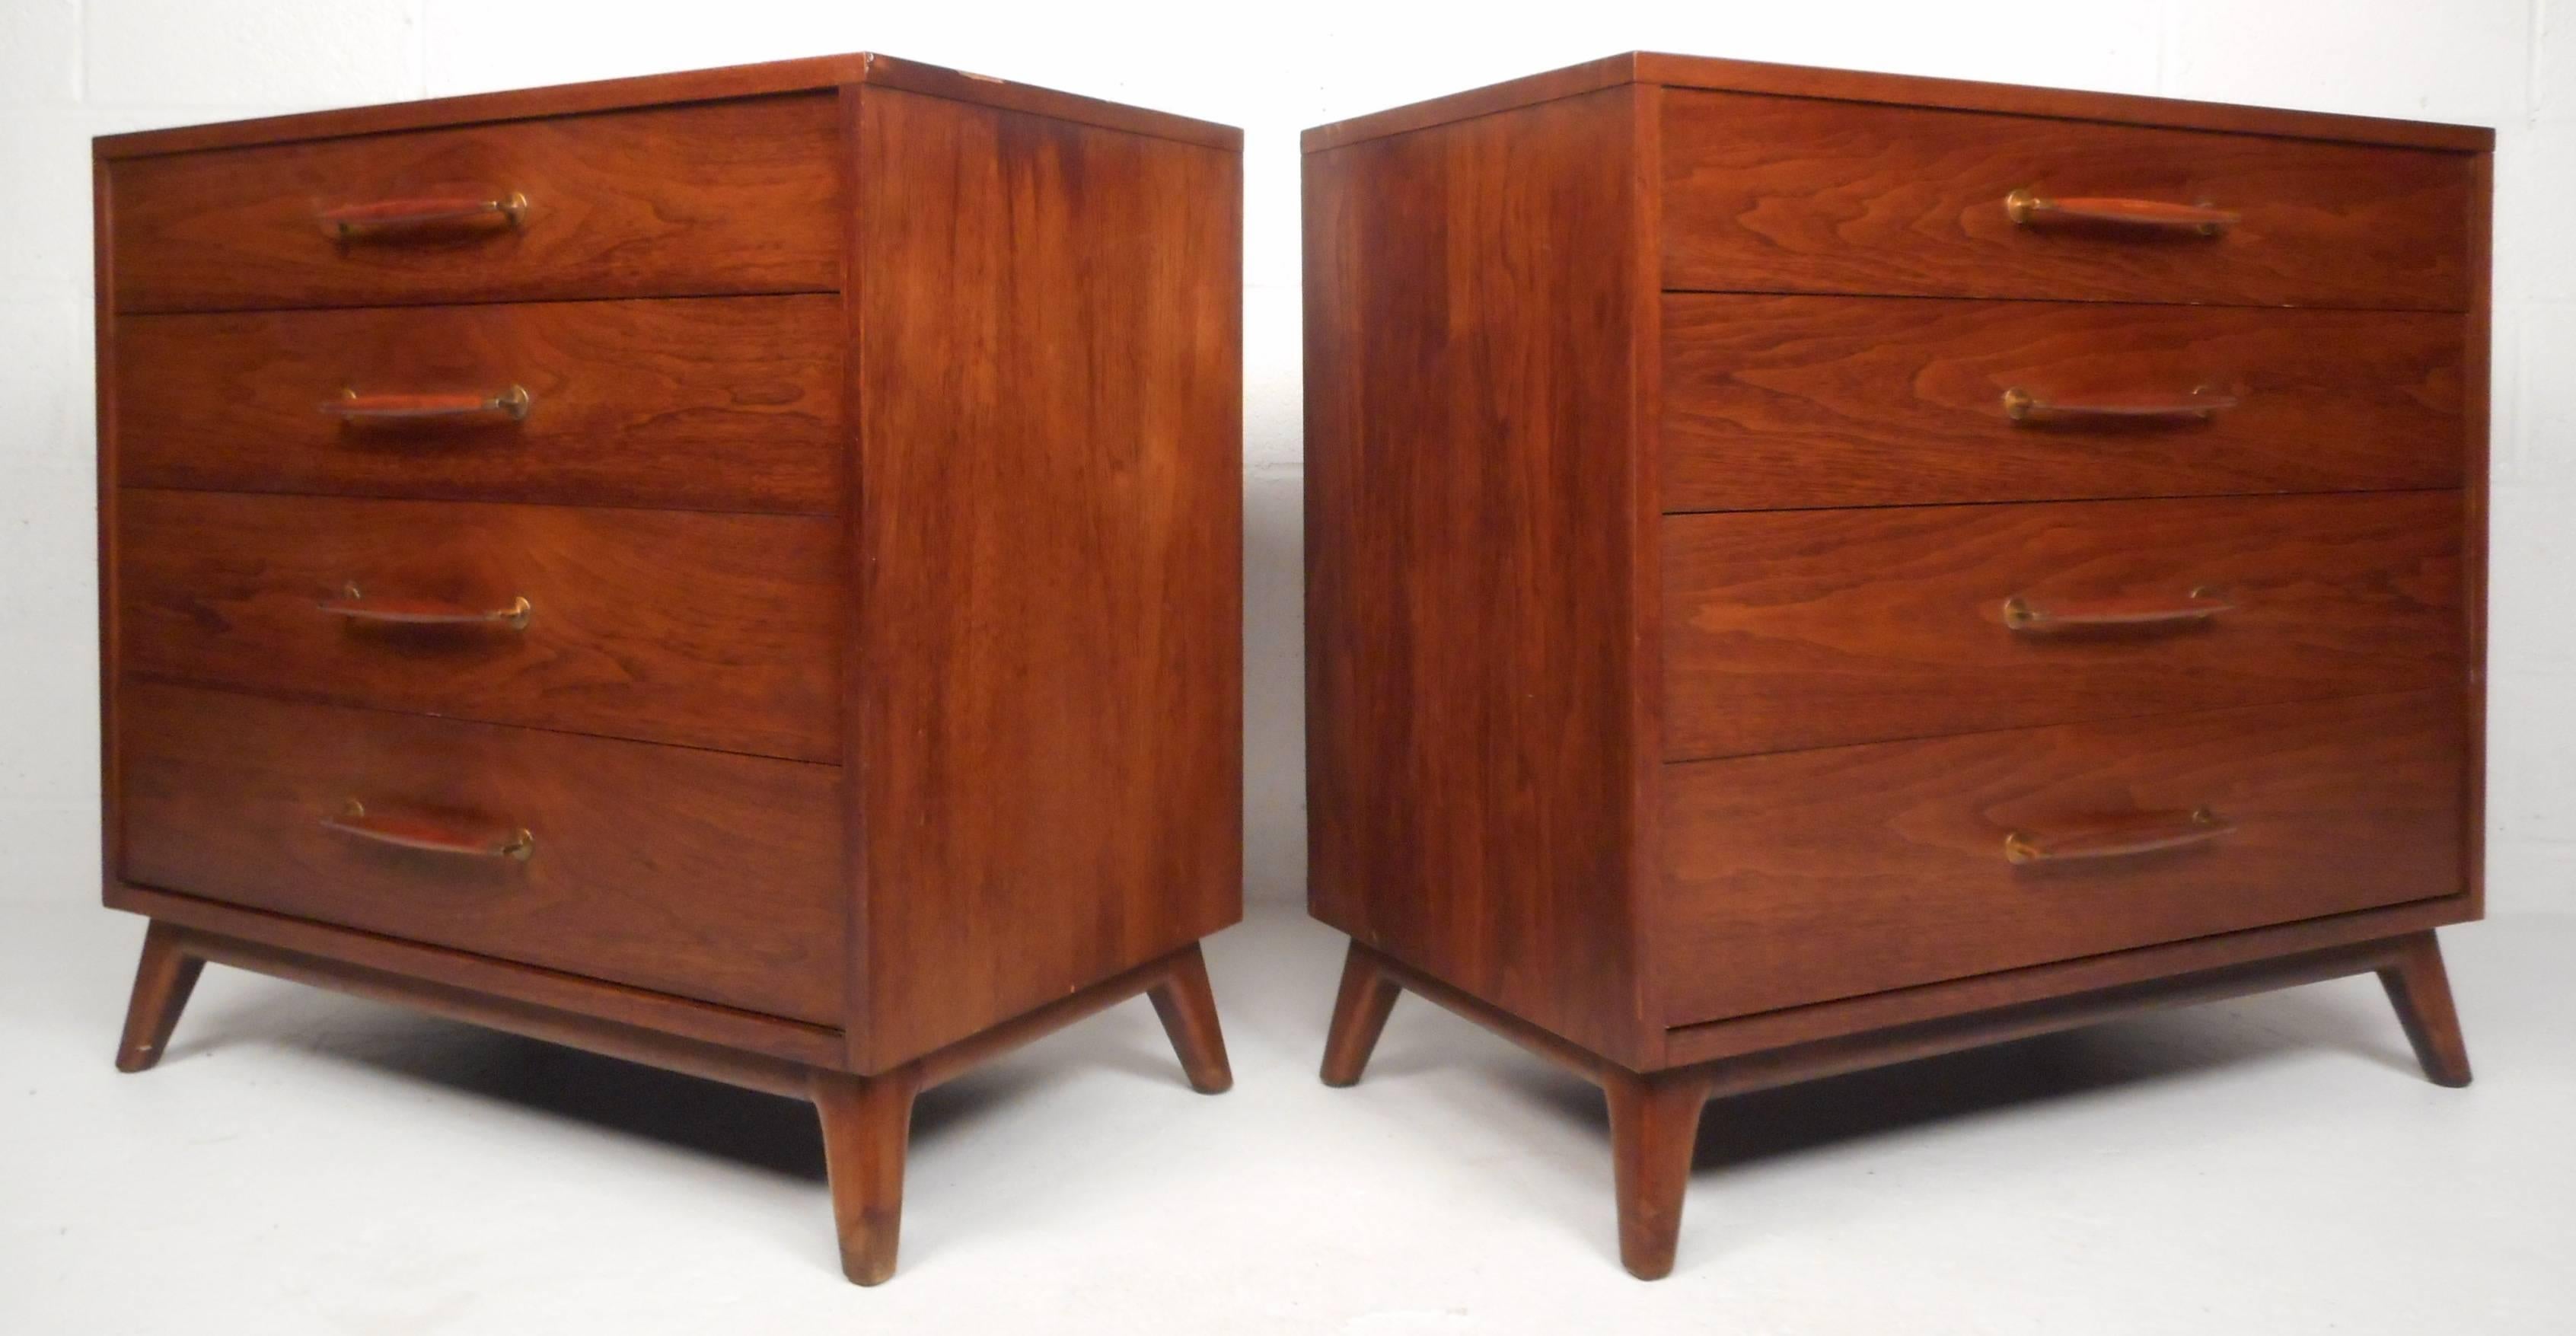 Well-designed pair of vintage modern dressers by Henredon feature four dovetailed drawers, wood handles with brass fixtures, and two vertical mahogany inlay strips on top. Stylish and sturdy construction with sleek, modern design. Please confirm